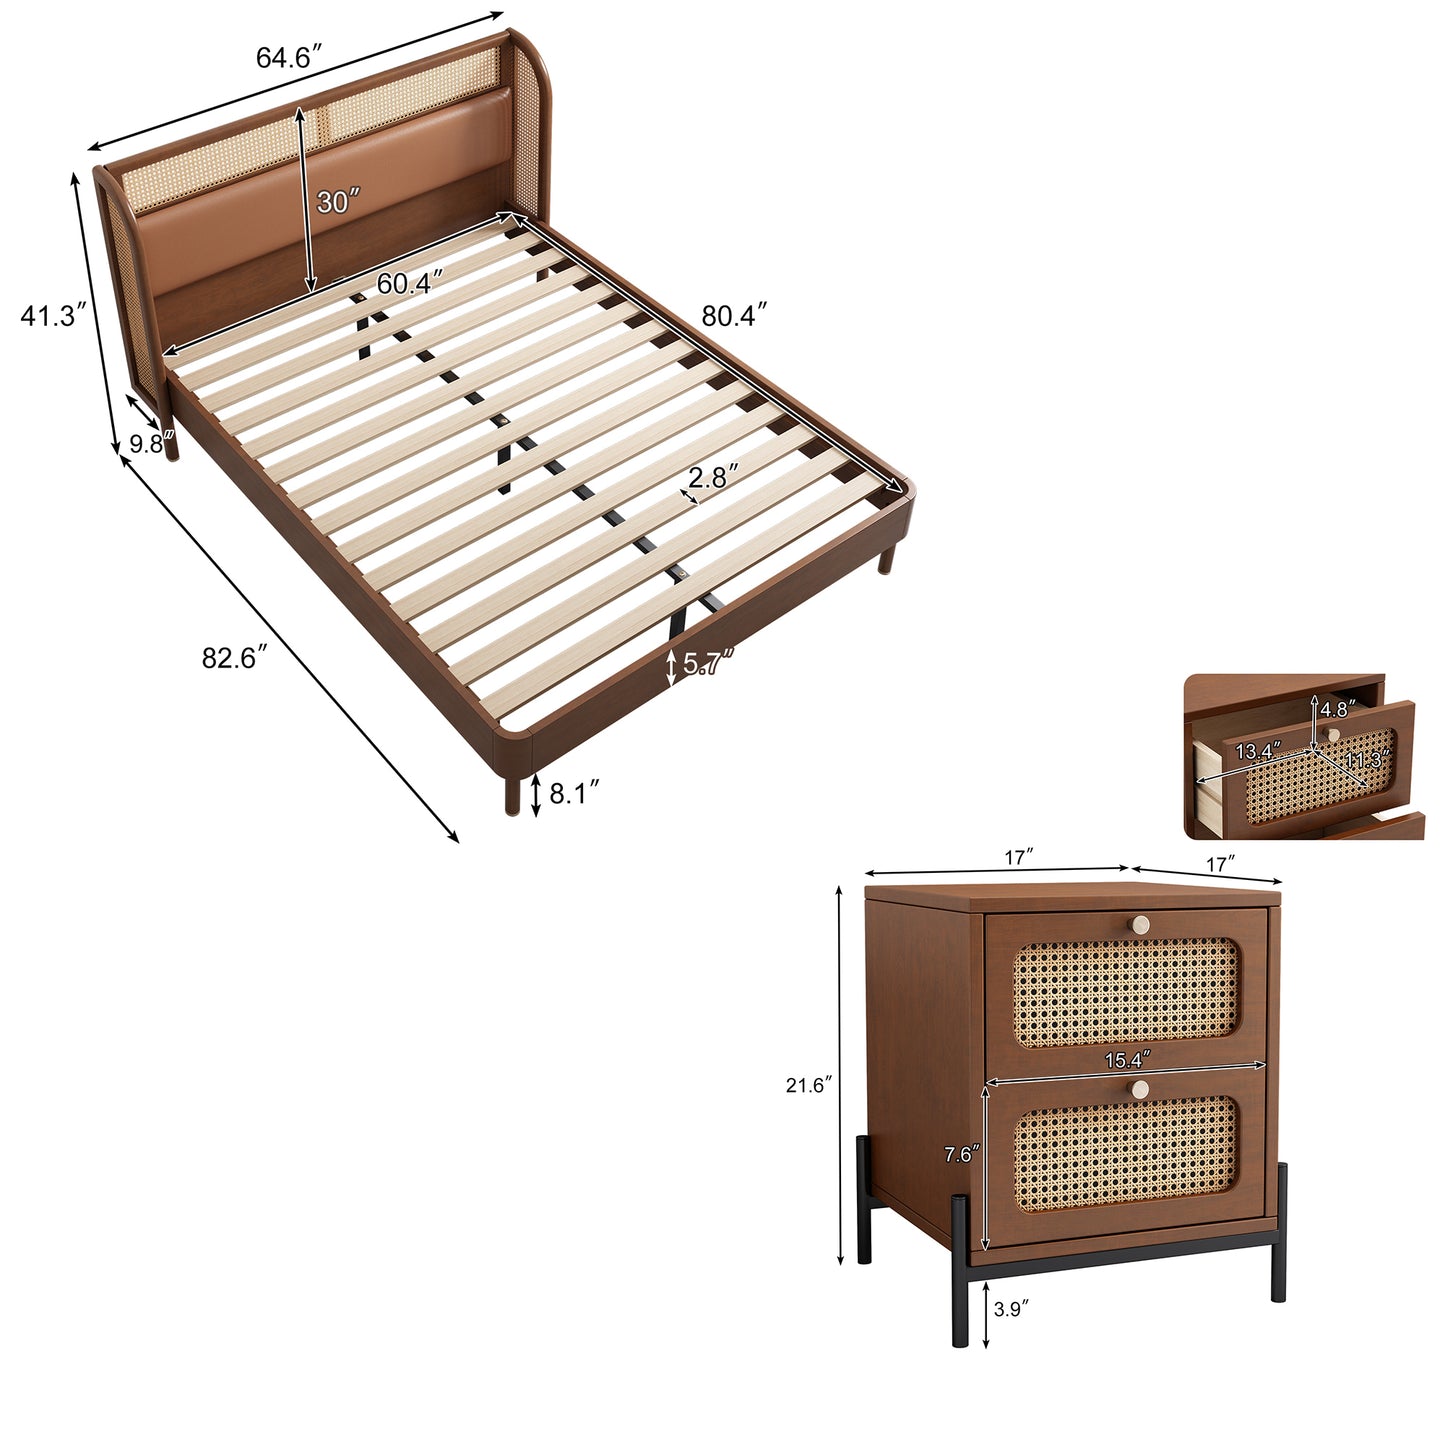 3 Pieces Modern Cannage Rattan Platform Queen Bed + Nightstand*2, Walnut - Enova Luxe Home Store